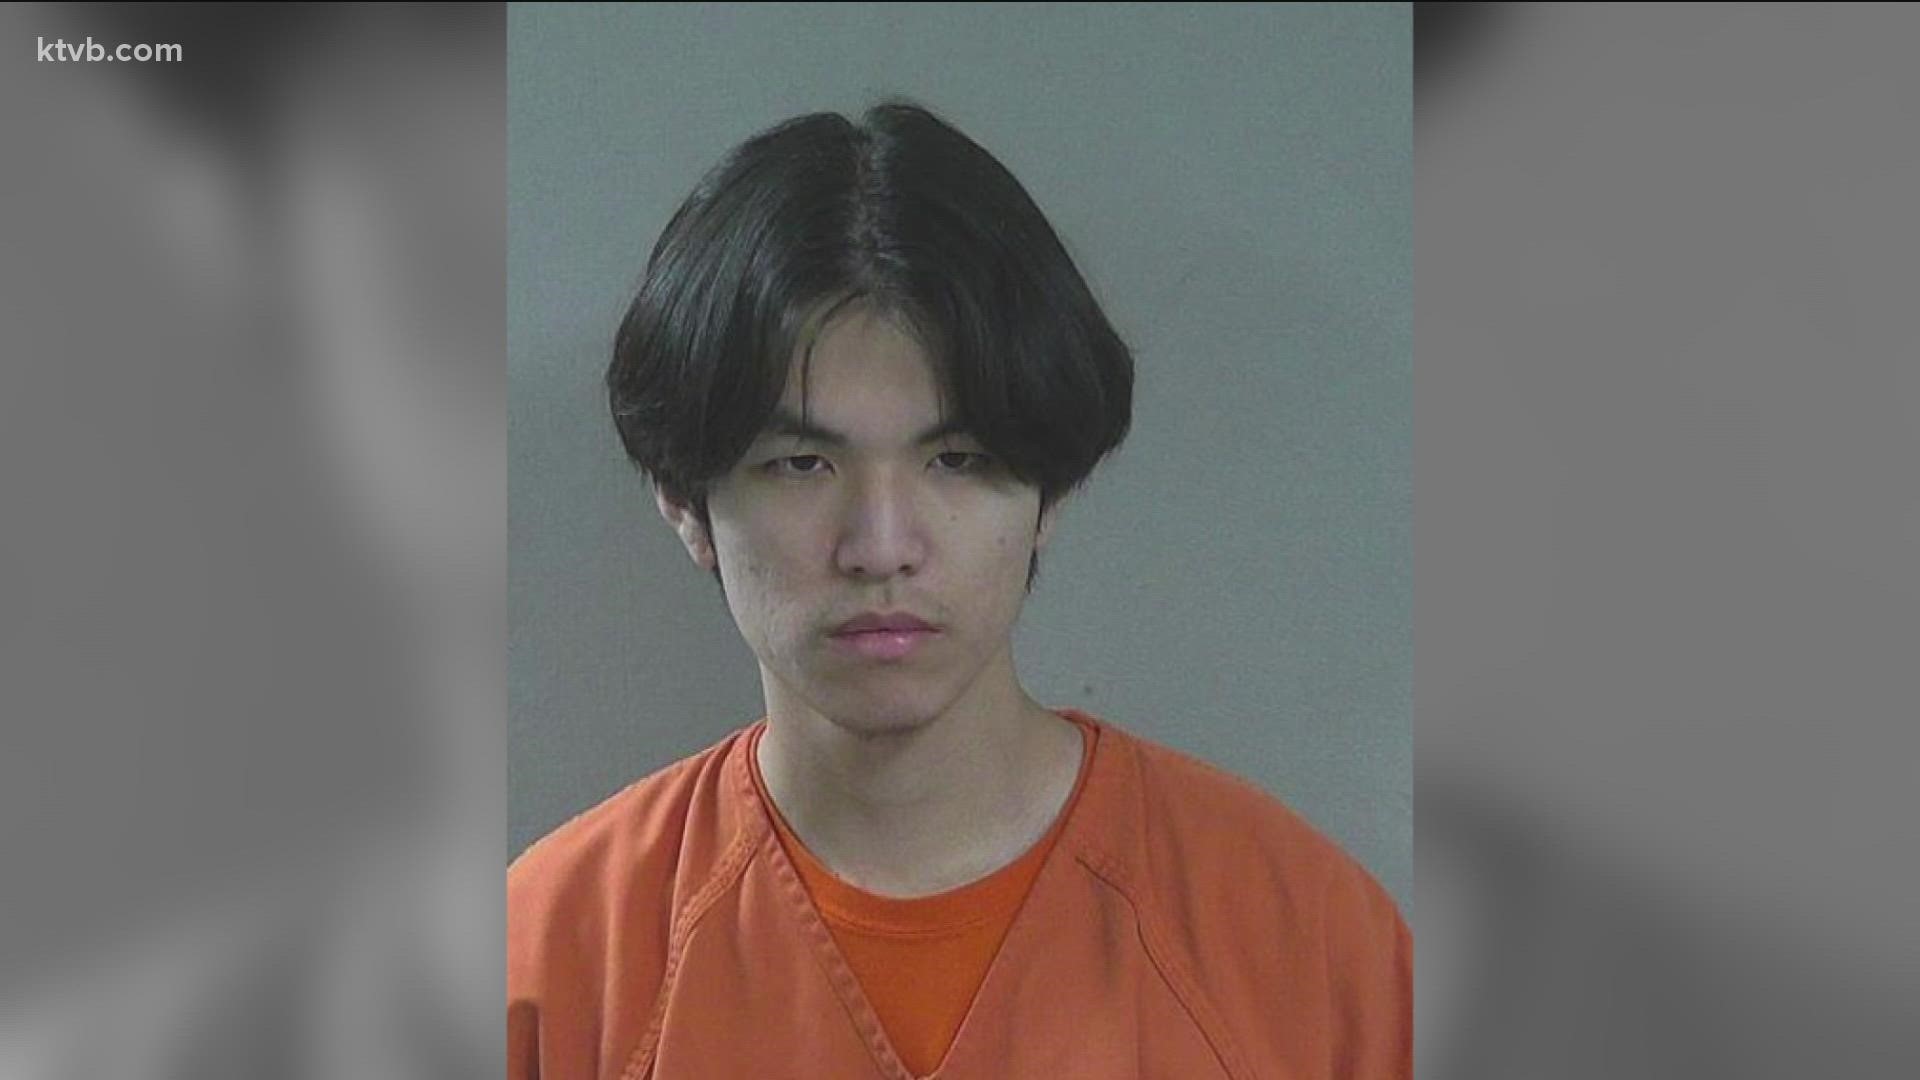 A 20-year-old California man is in the Canyon County Jail, accused of enticing and kidnapping an 11-year-old girl from Nampa.